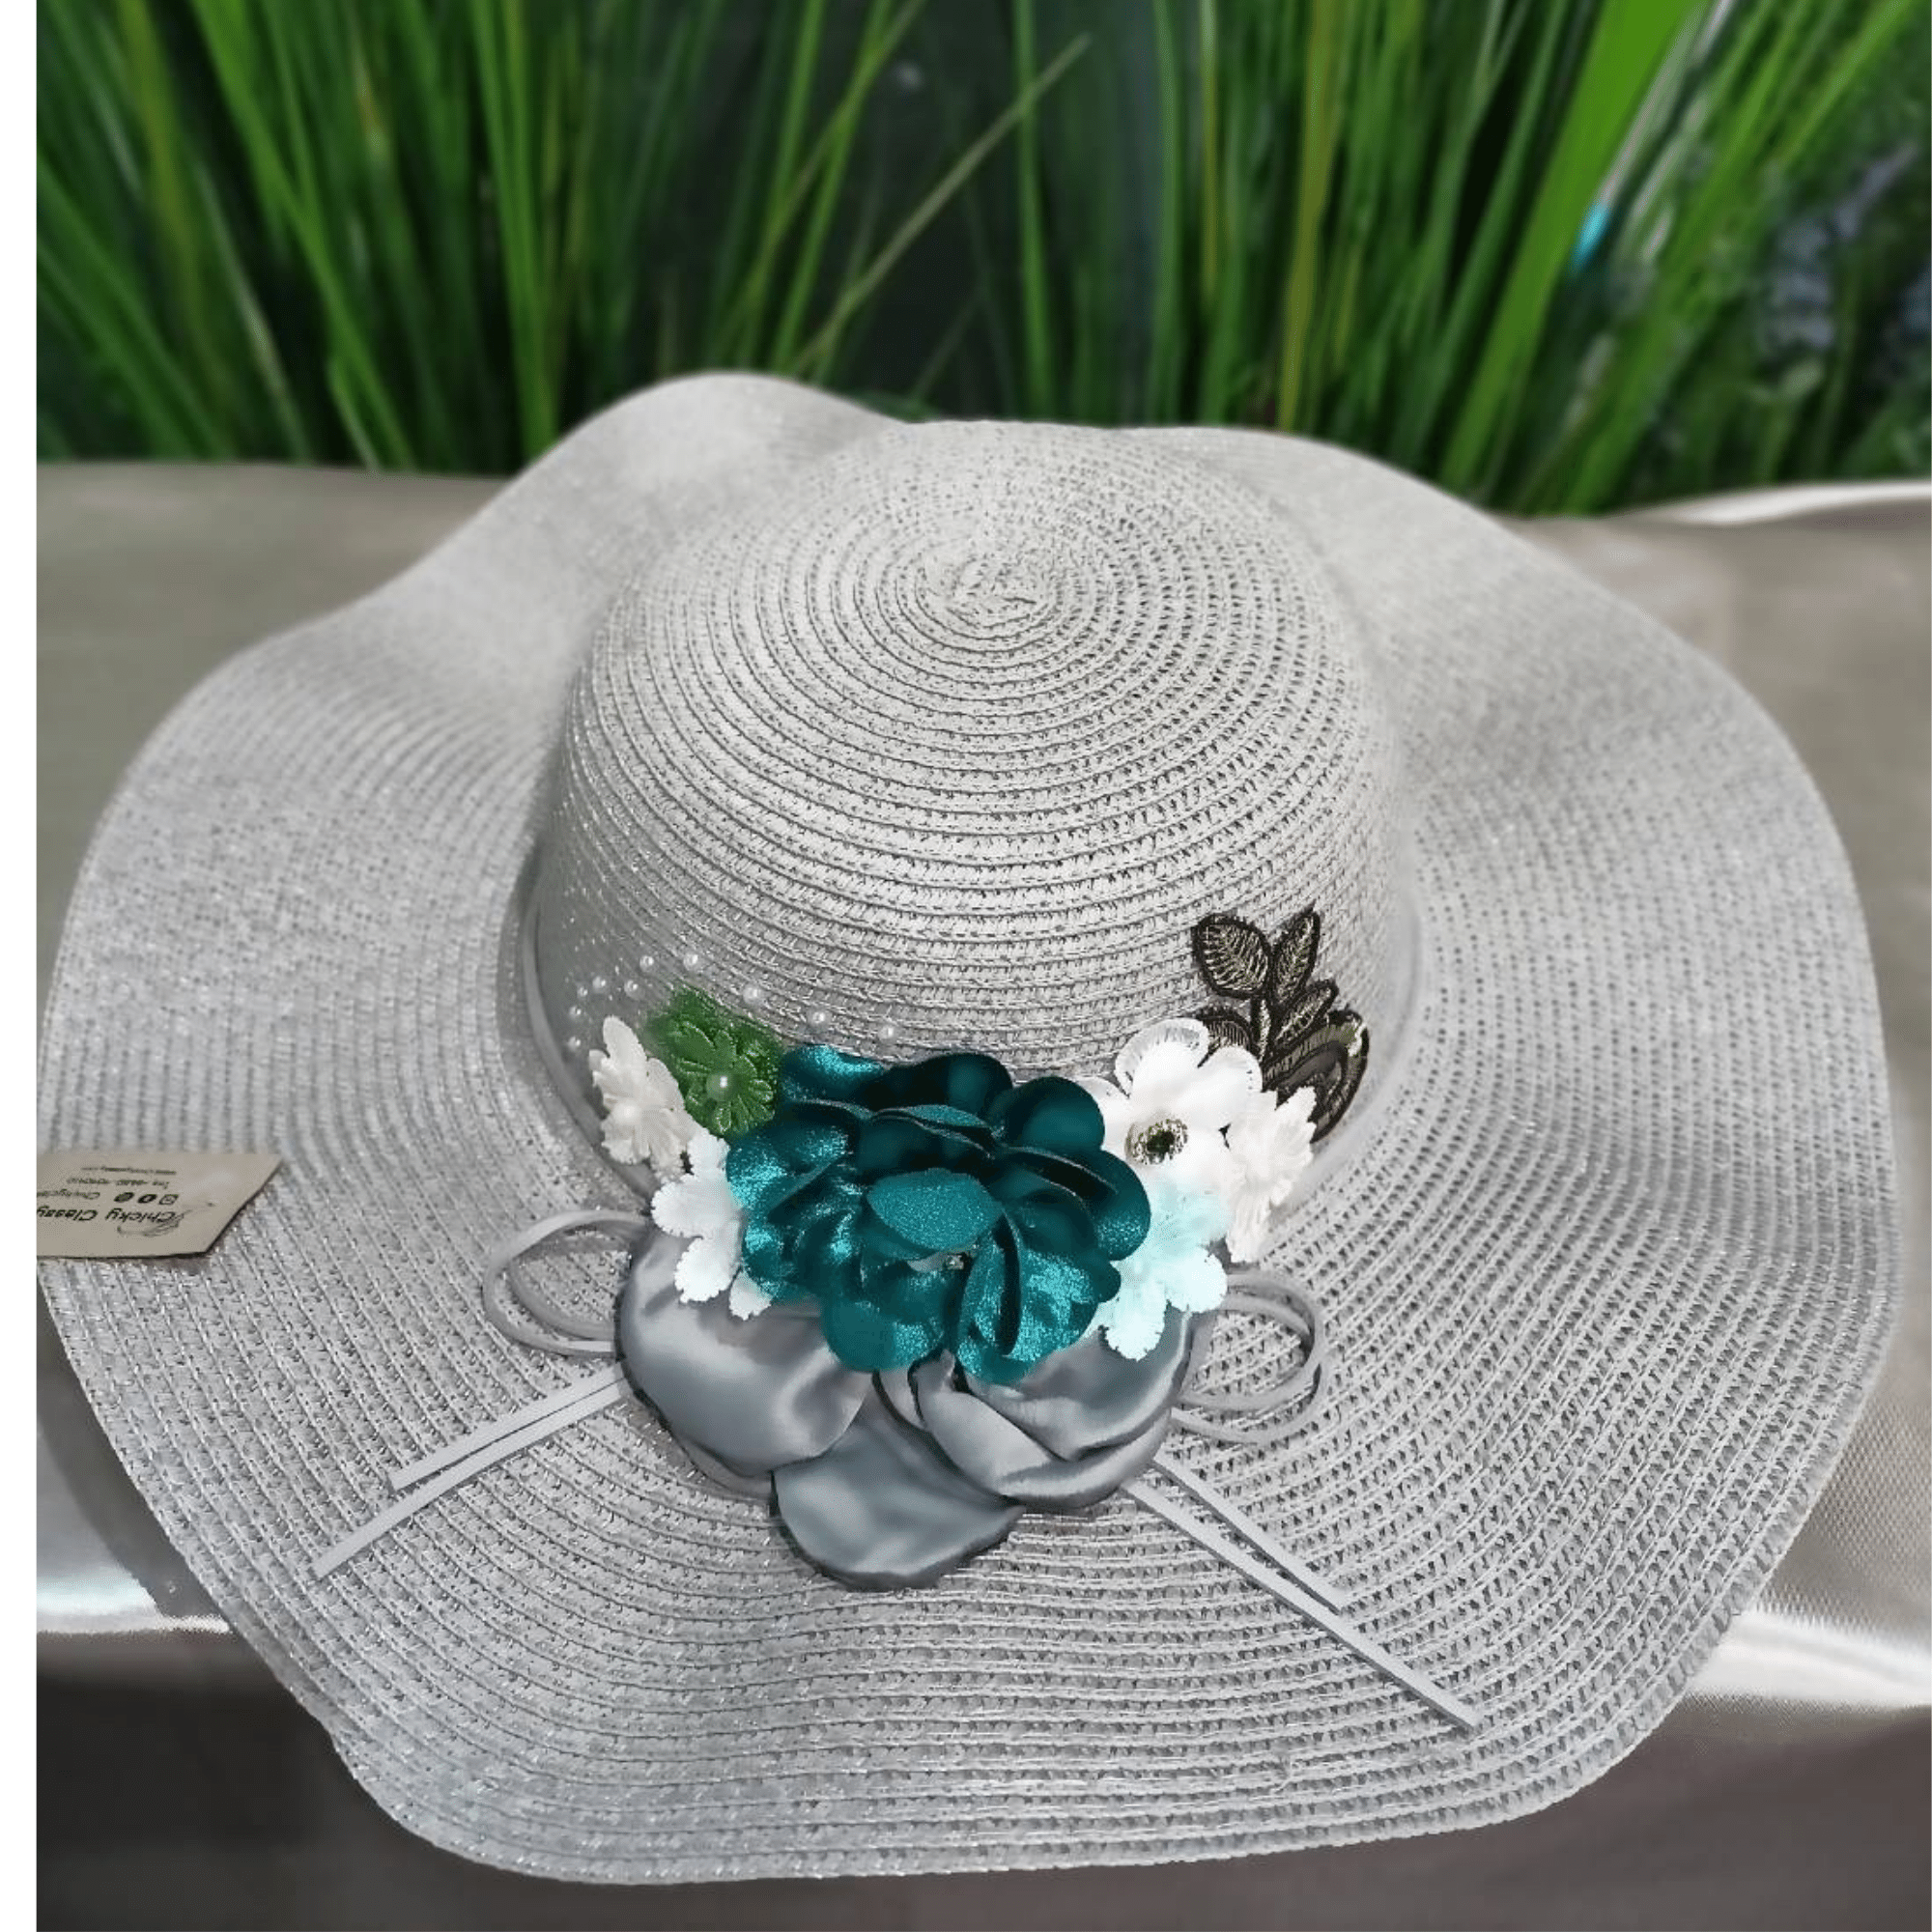 classic Straw hats medium size for wedding and beach